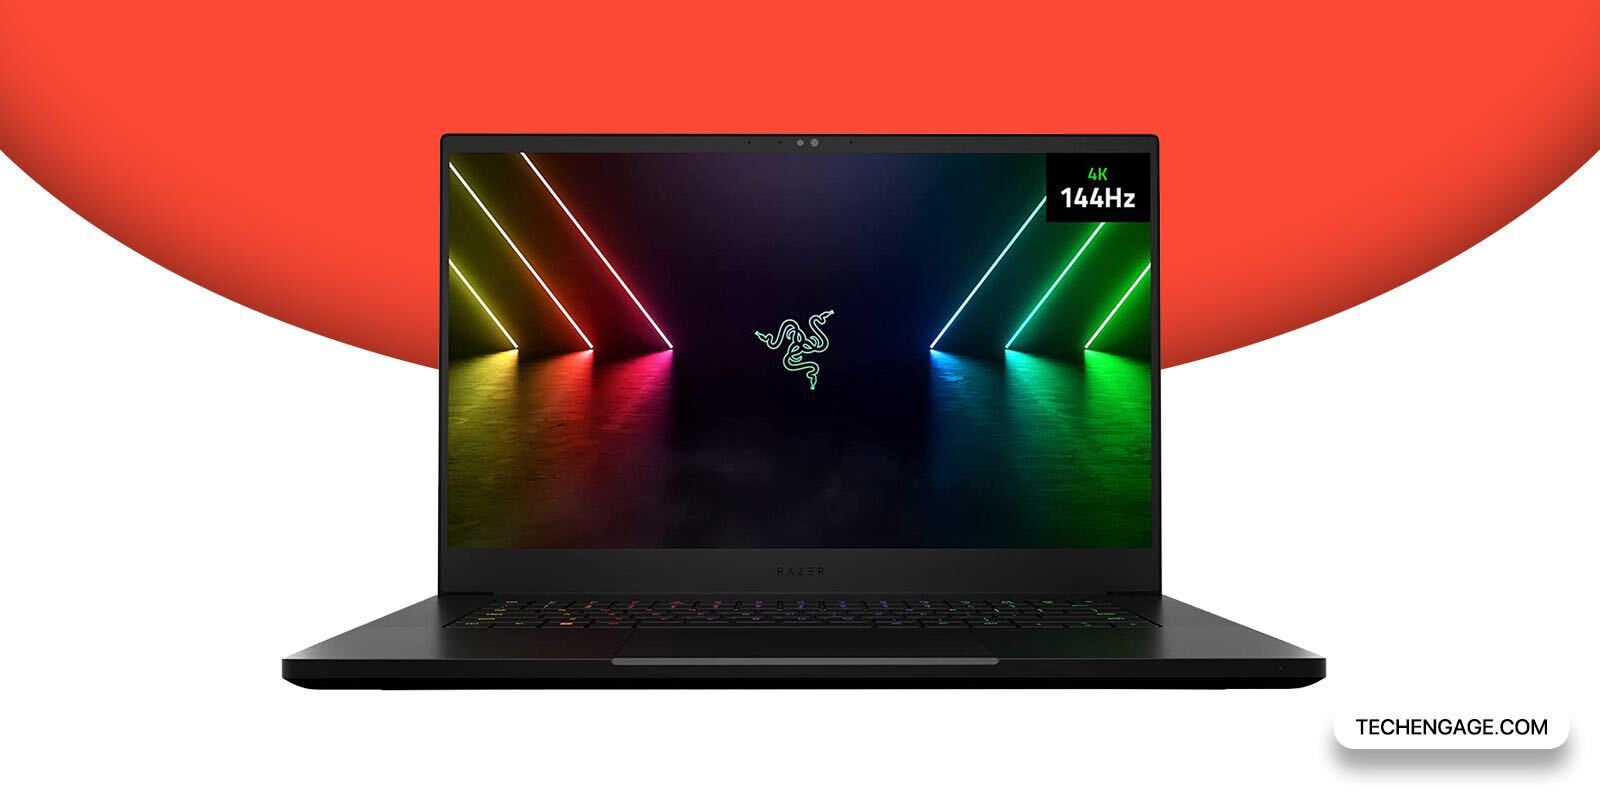 A Picture Of A Razer Gaming Laptop